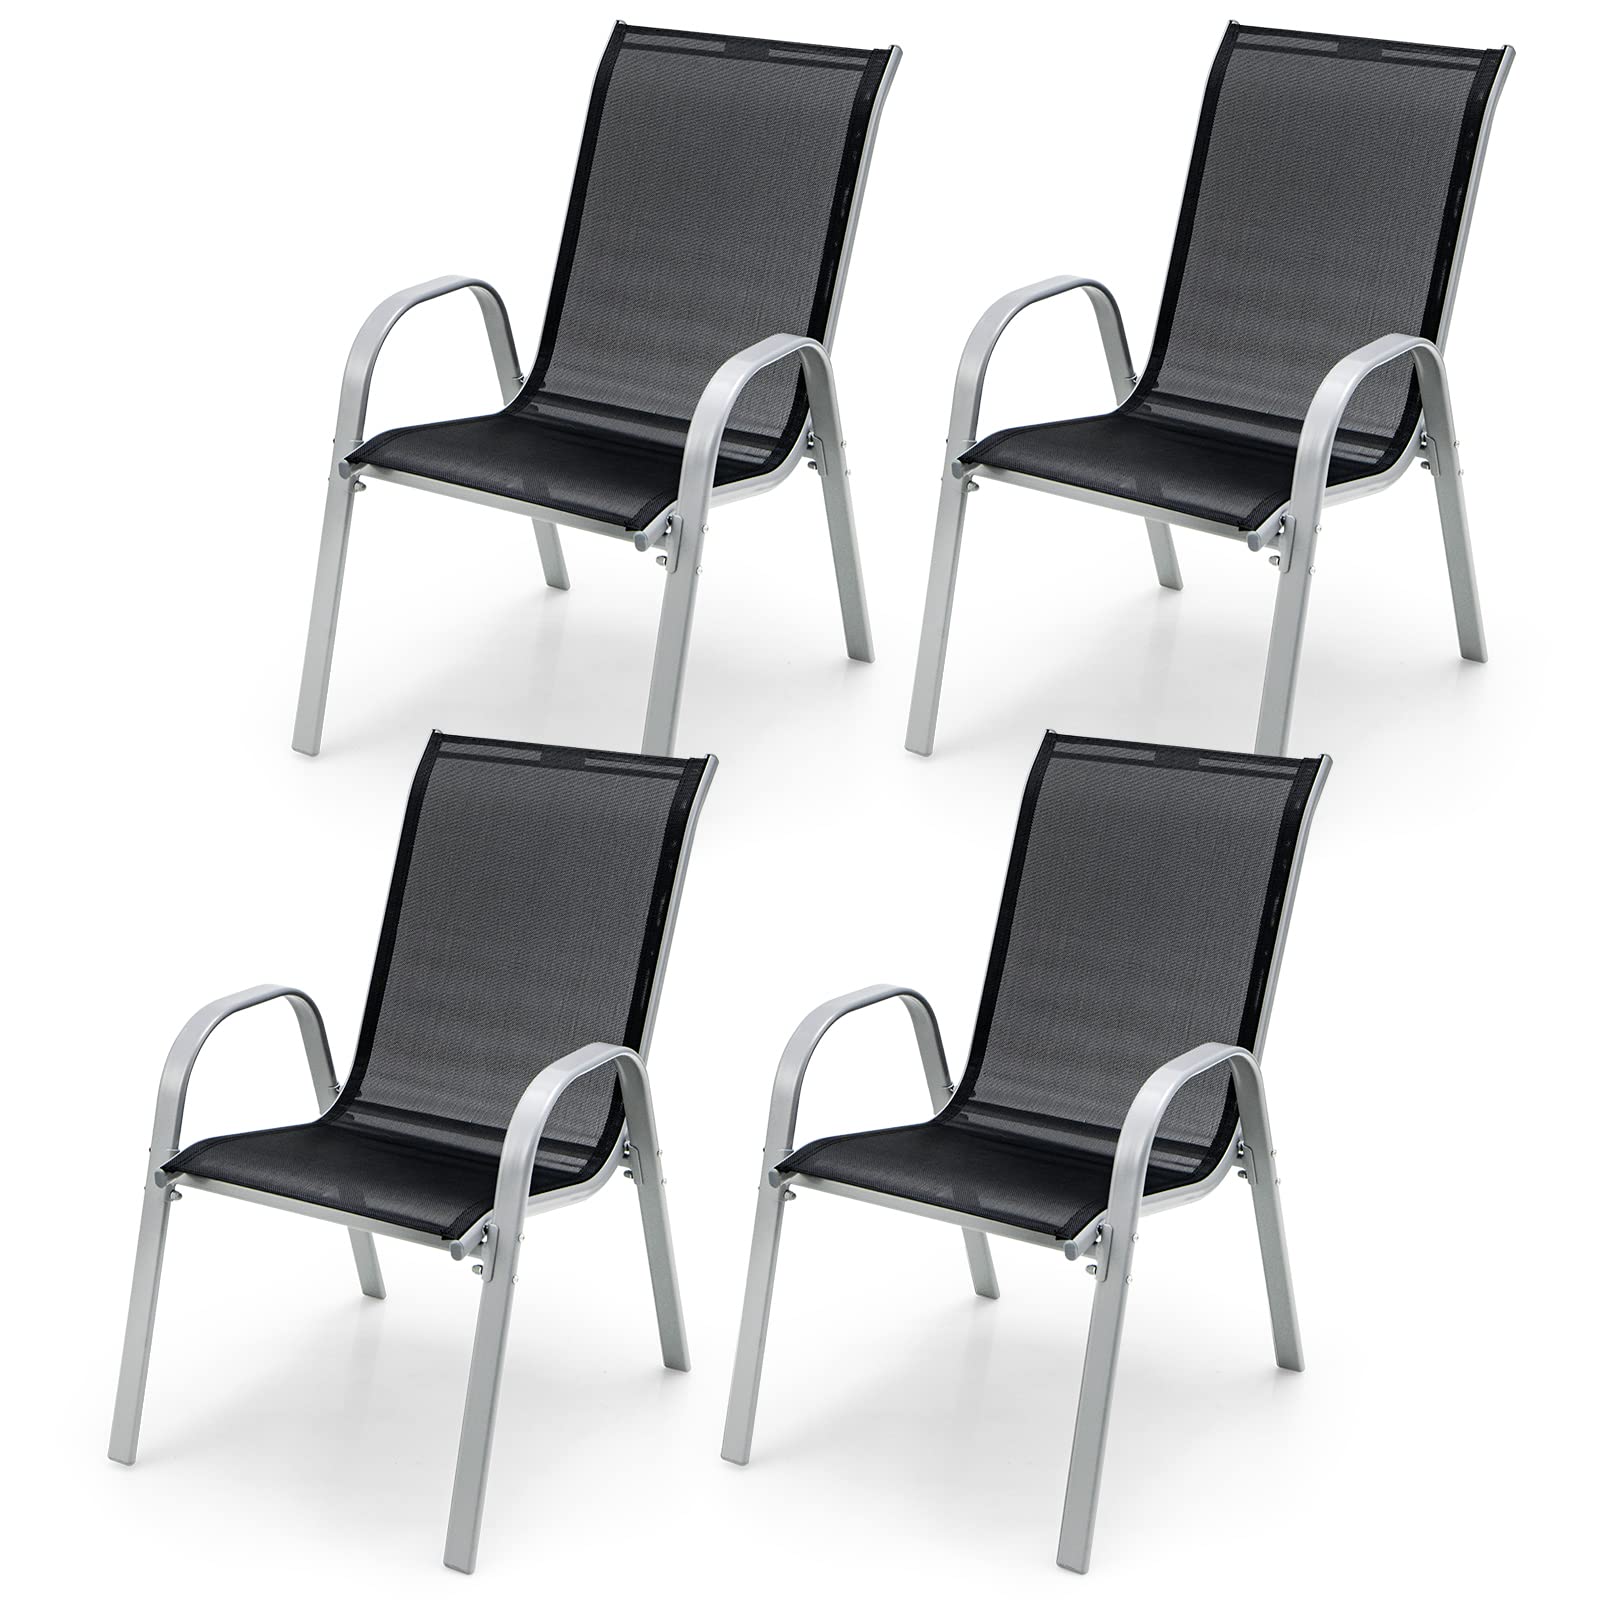 Giantex Dining Outdoor Armrests of Patio Chairs, Chairs Set Giantexus – W/Curved 4